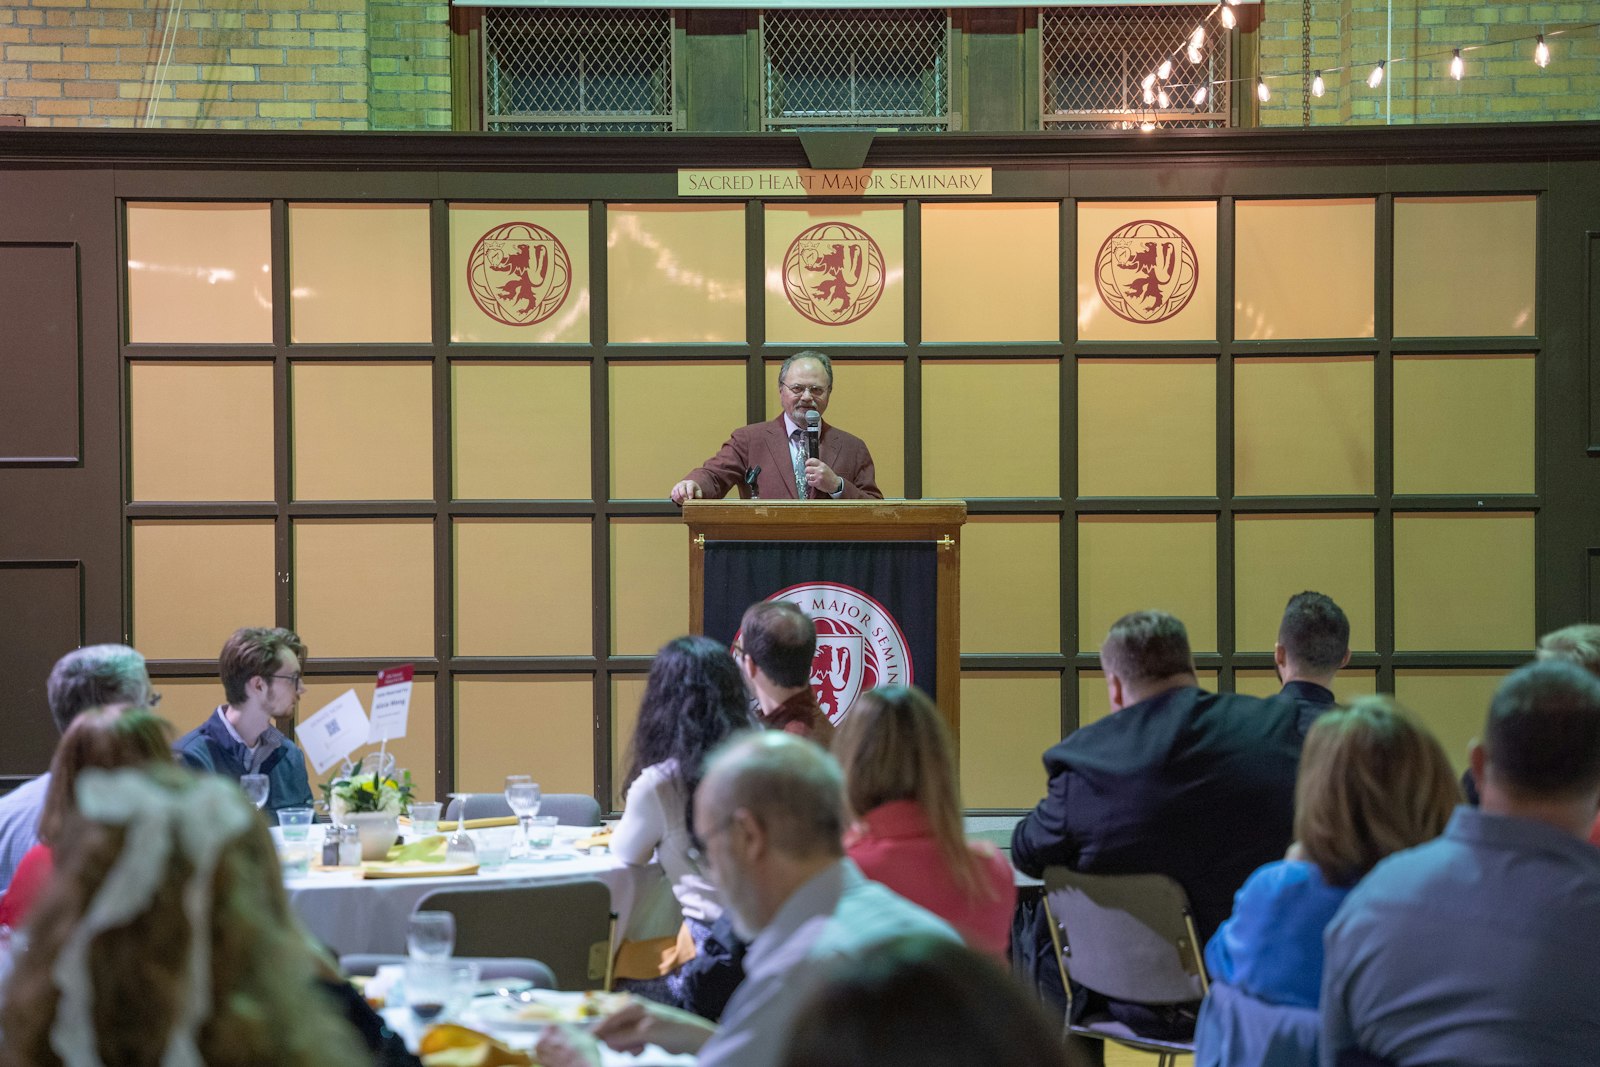 Edmund Miller, a teacher at Father Gabriel Richard High School in Ann Arbor and founder of Guadalupe Workers, delivered the keynote address of the night, discussing the impact of Guadalupe Workers and what it means to live in hope.